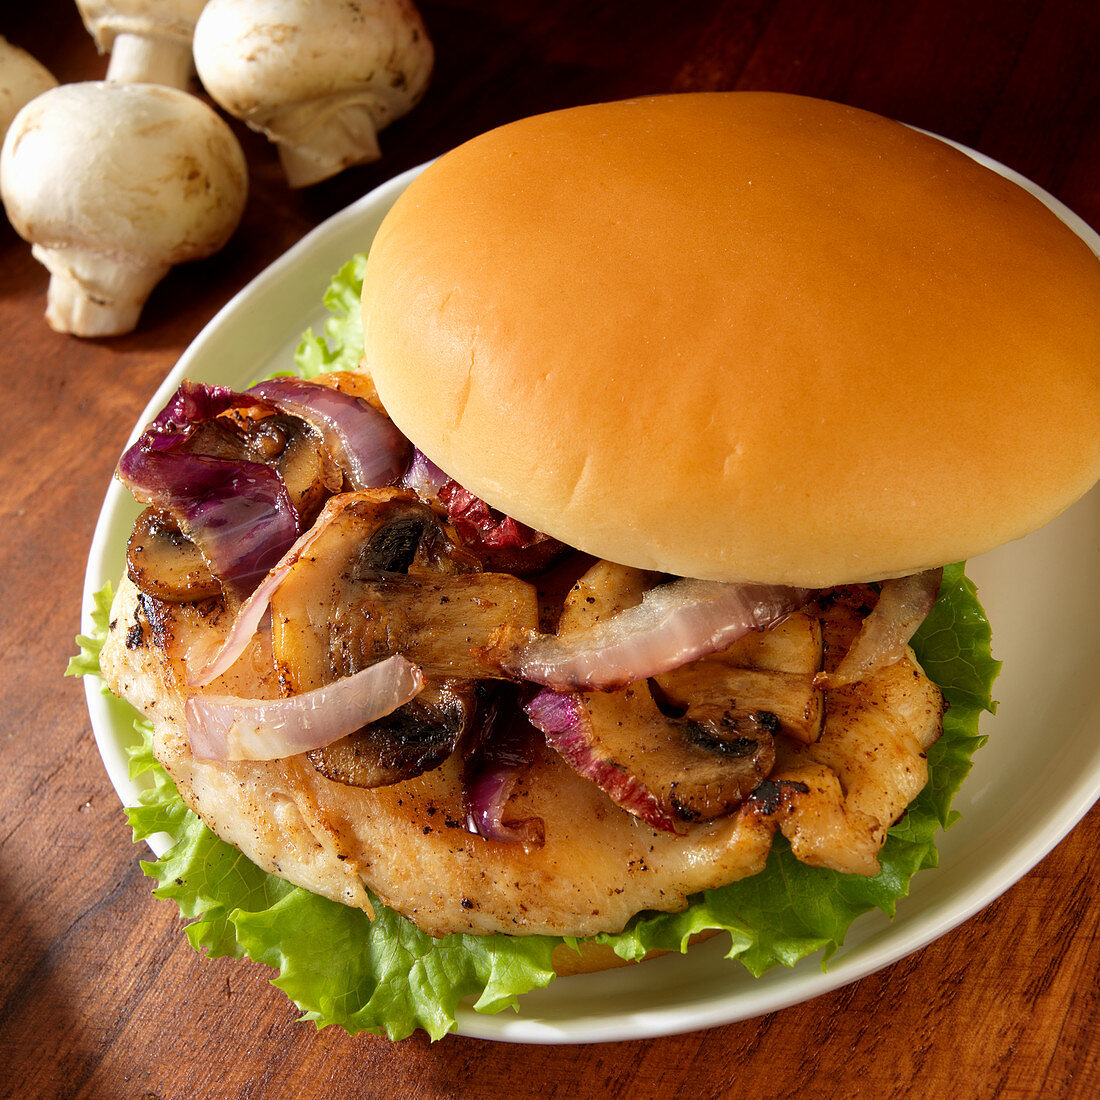 Grilled chicken sandwich with grilled mushrooms and onions